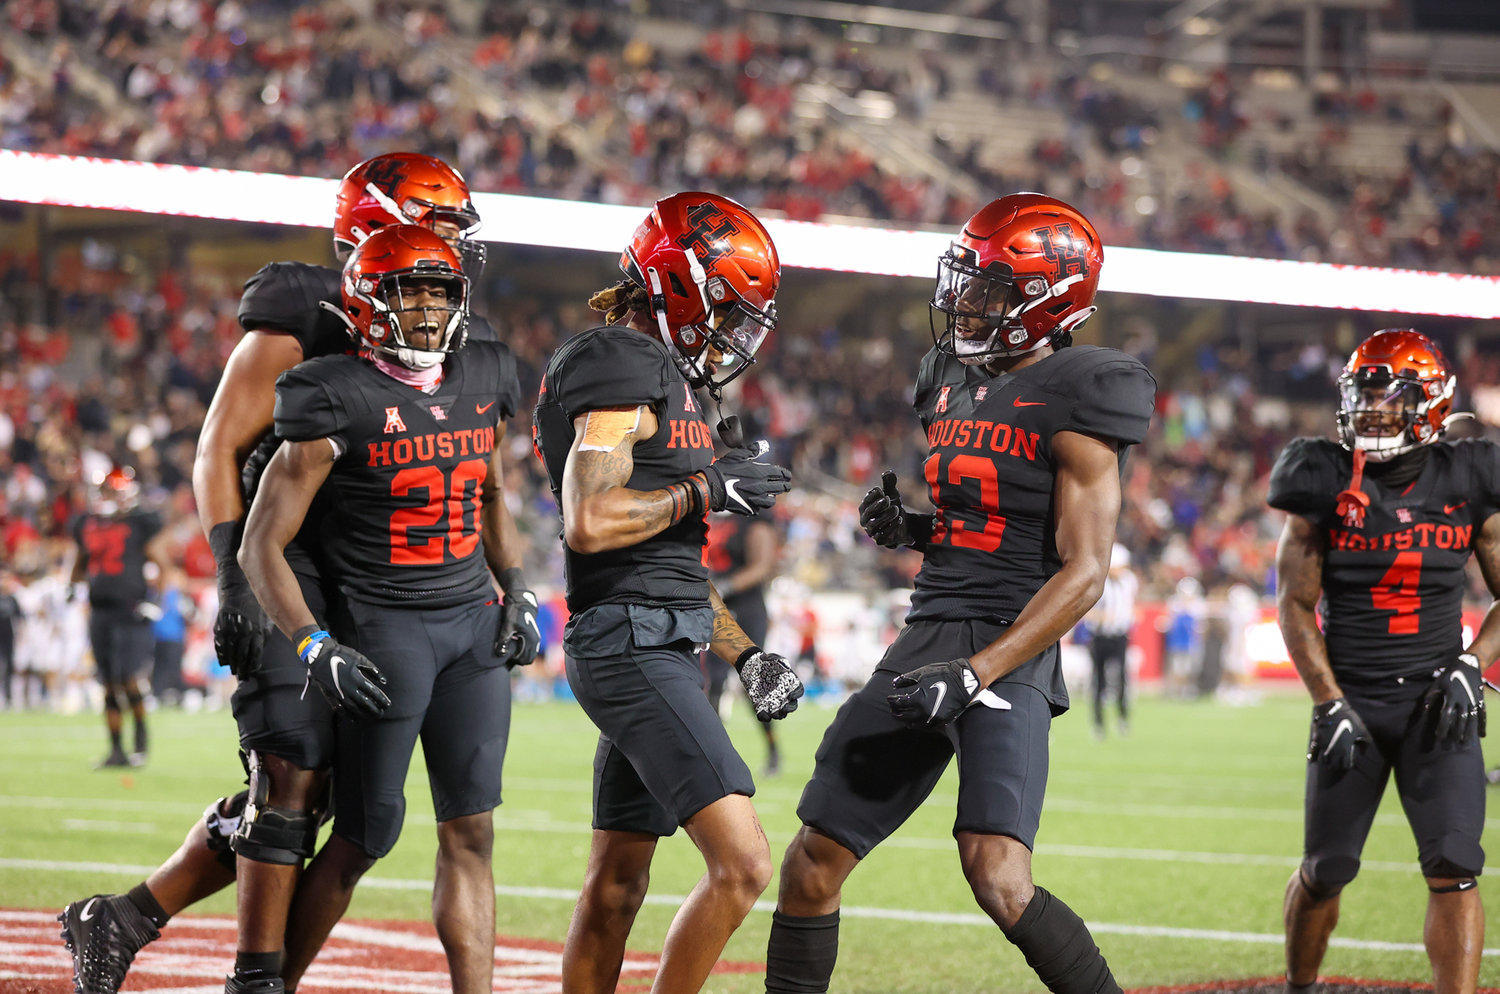 The Houston Cougars offense celebrates after a fourth-quarter touchdown in an NCAA football game between Houston and SMU on October 30, 2021 in Houston, Texas. Houston won 44-37.